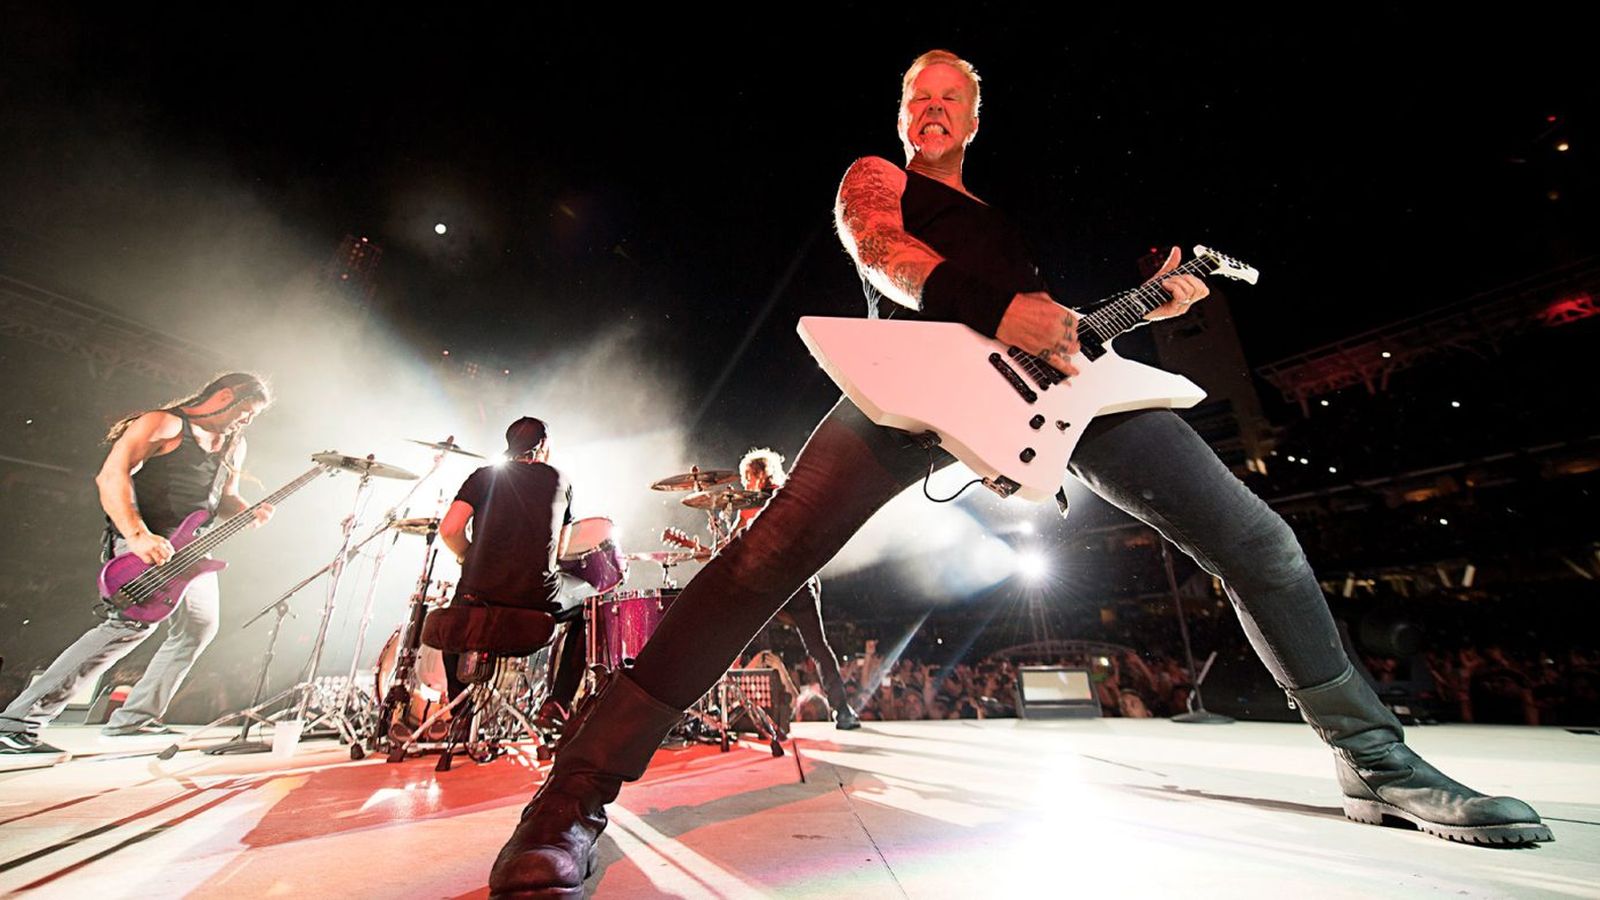 Metallica live at the cinema for two event evenings on 19 and 21 August